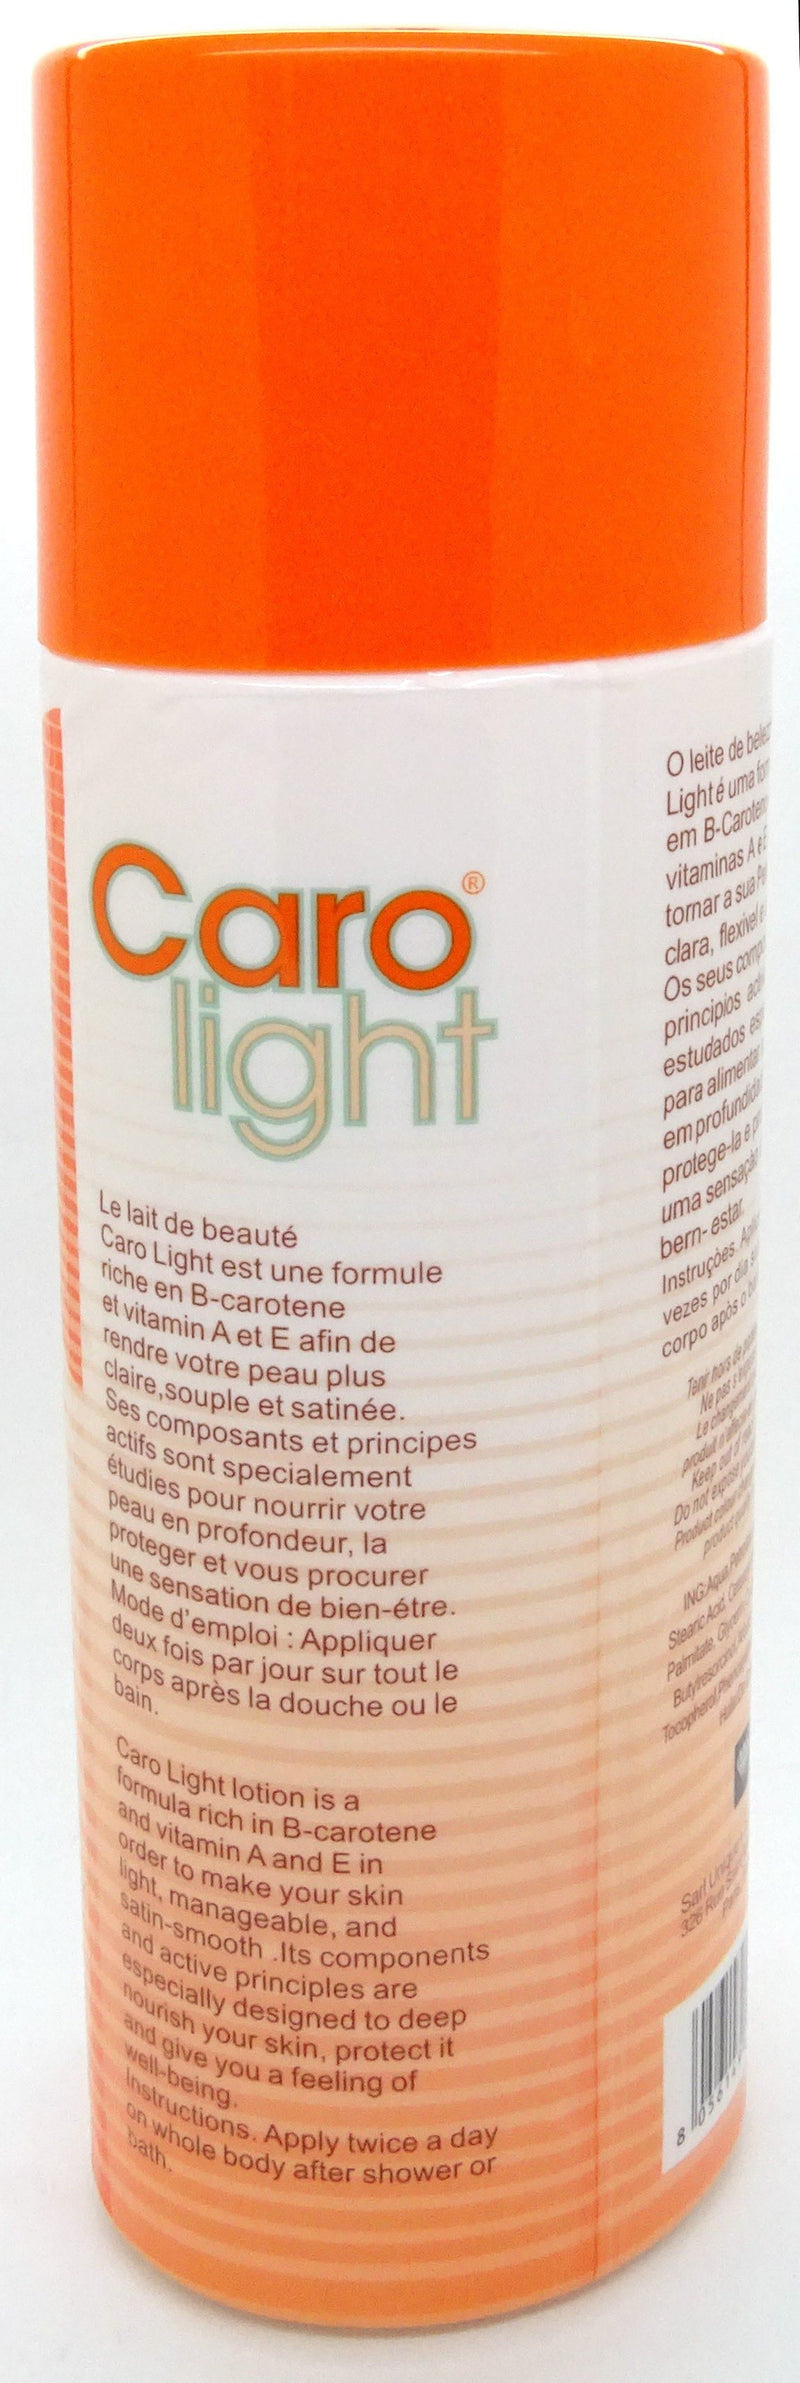 Caro light Lightening Beauty Lotion With Carrot Oil 500ml | gtworld.be 